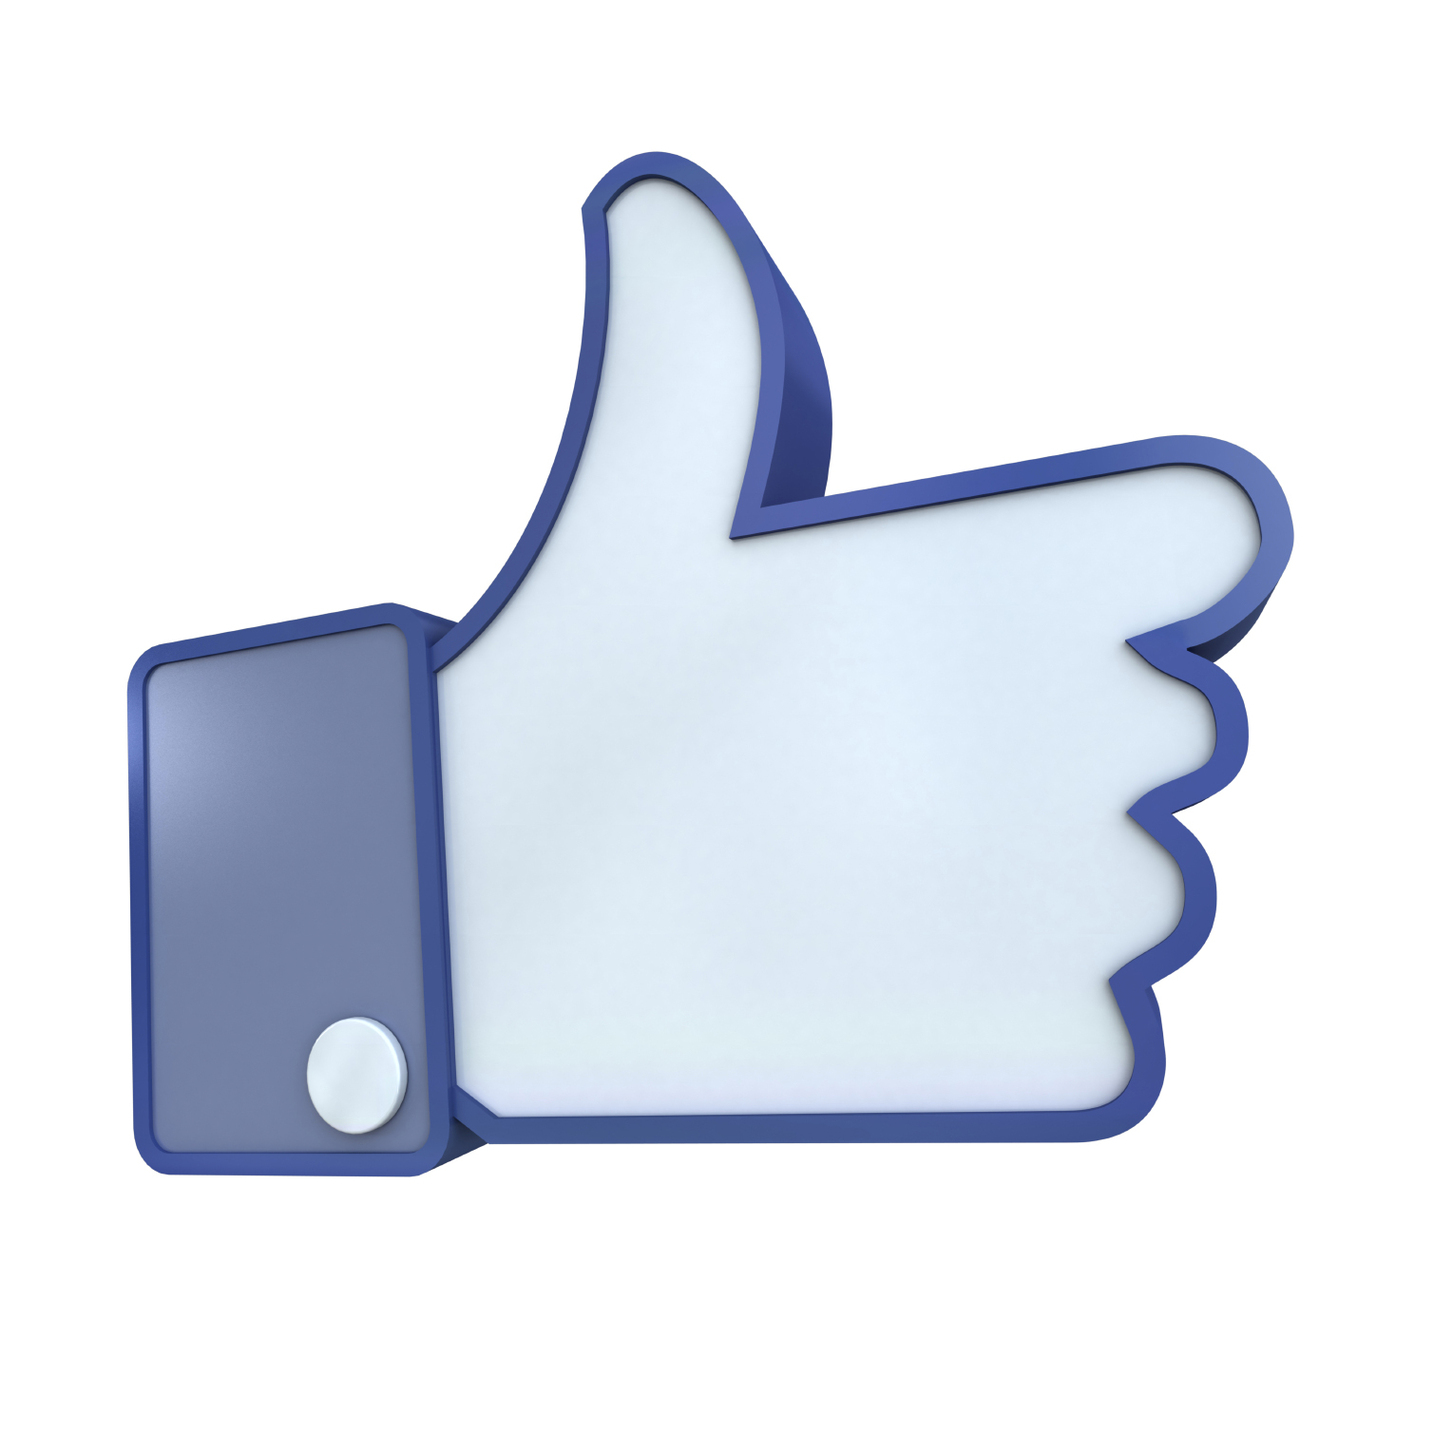 Facebook Thumbs Up Icon Clipart - Free to use Clip Art Resource